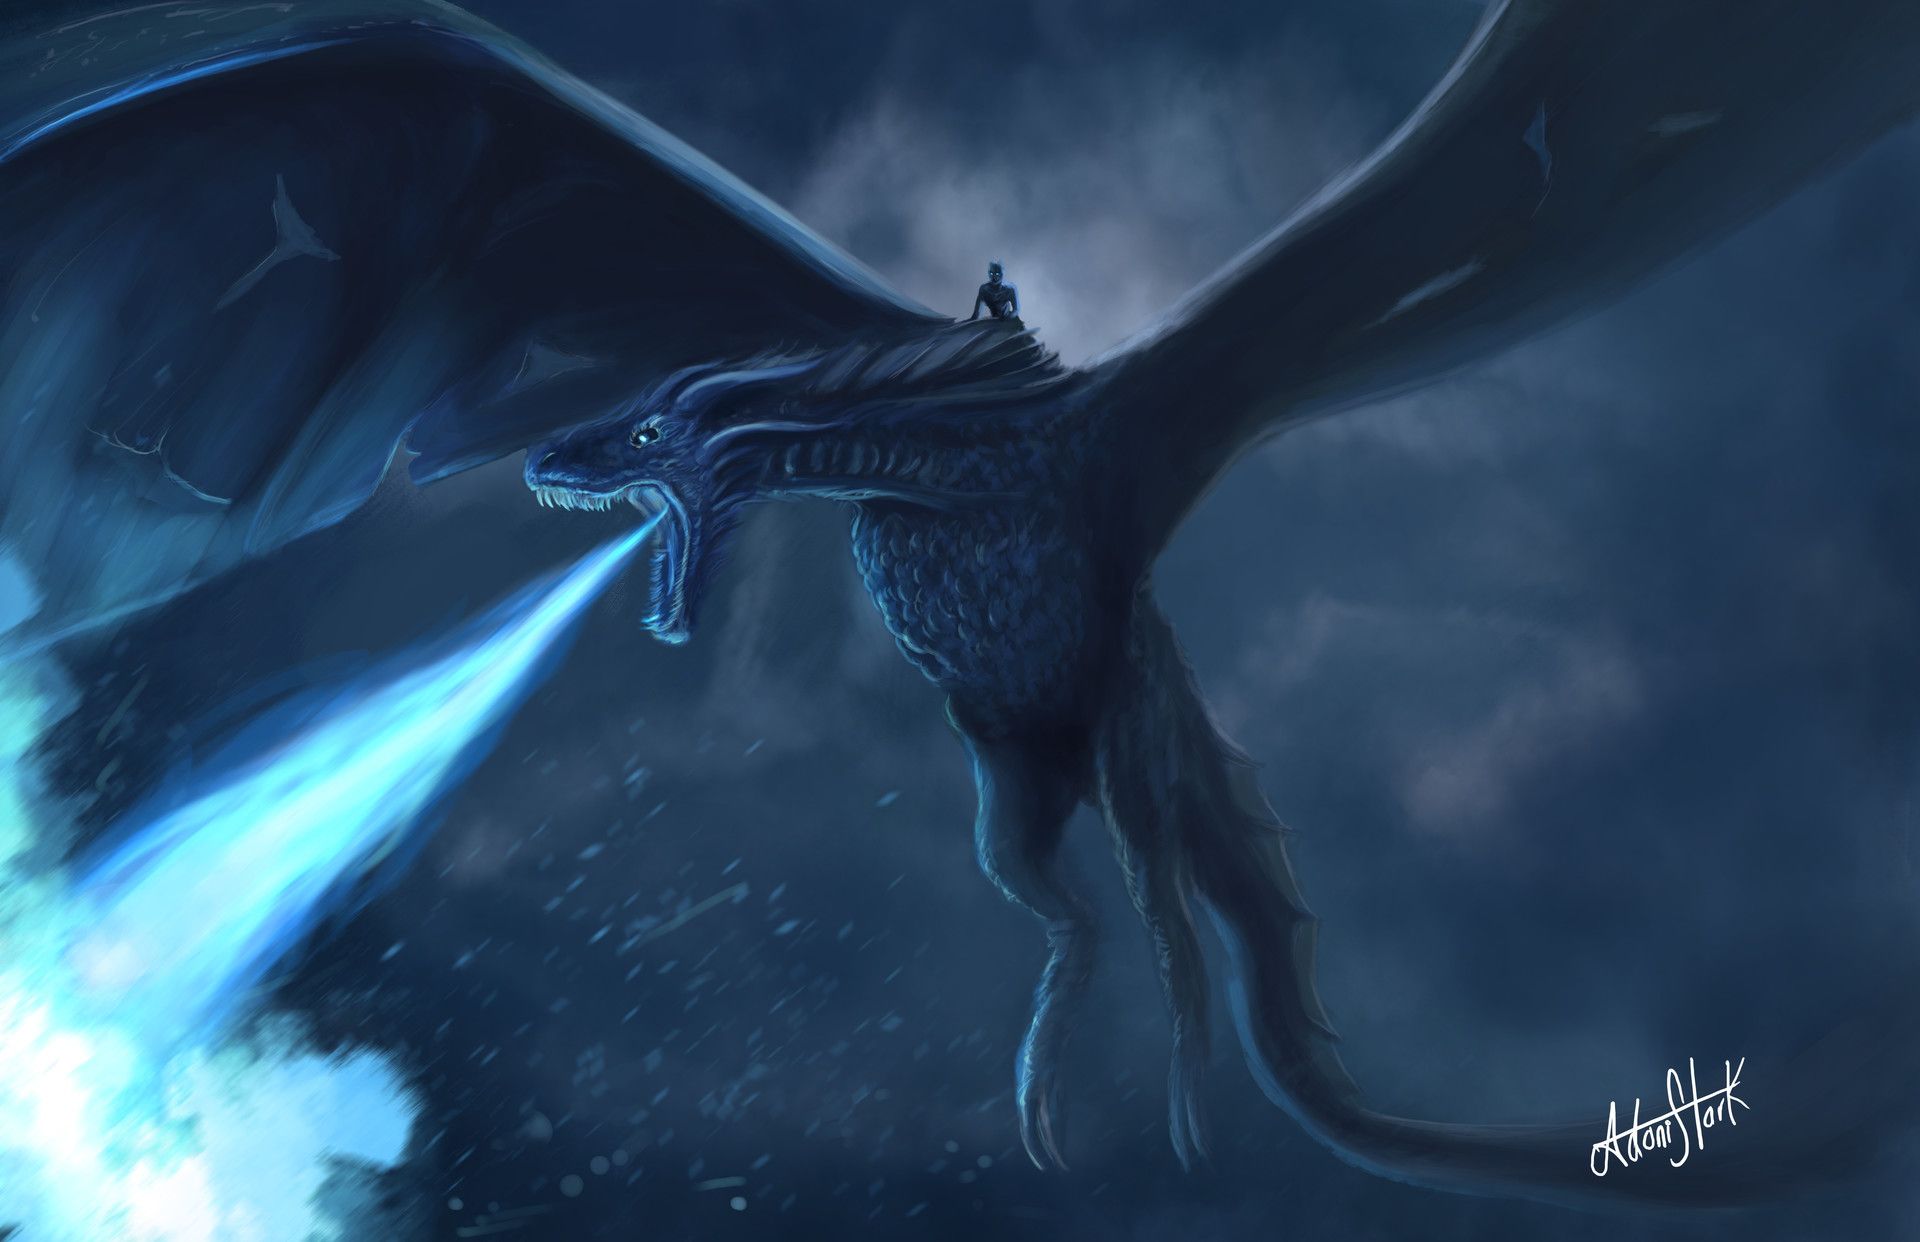 Download 21 ice-dragon-wallpapers Awesome-Dragon-Wallpapers-45-Download-4K-Wallpapers-For-.jpg